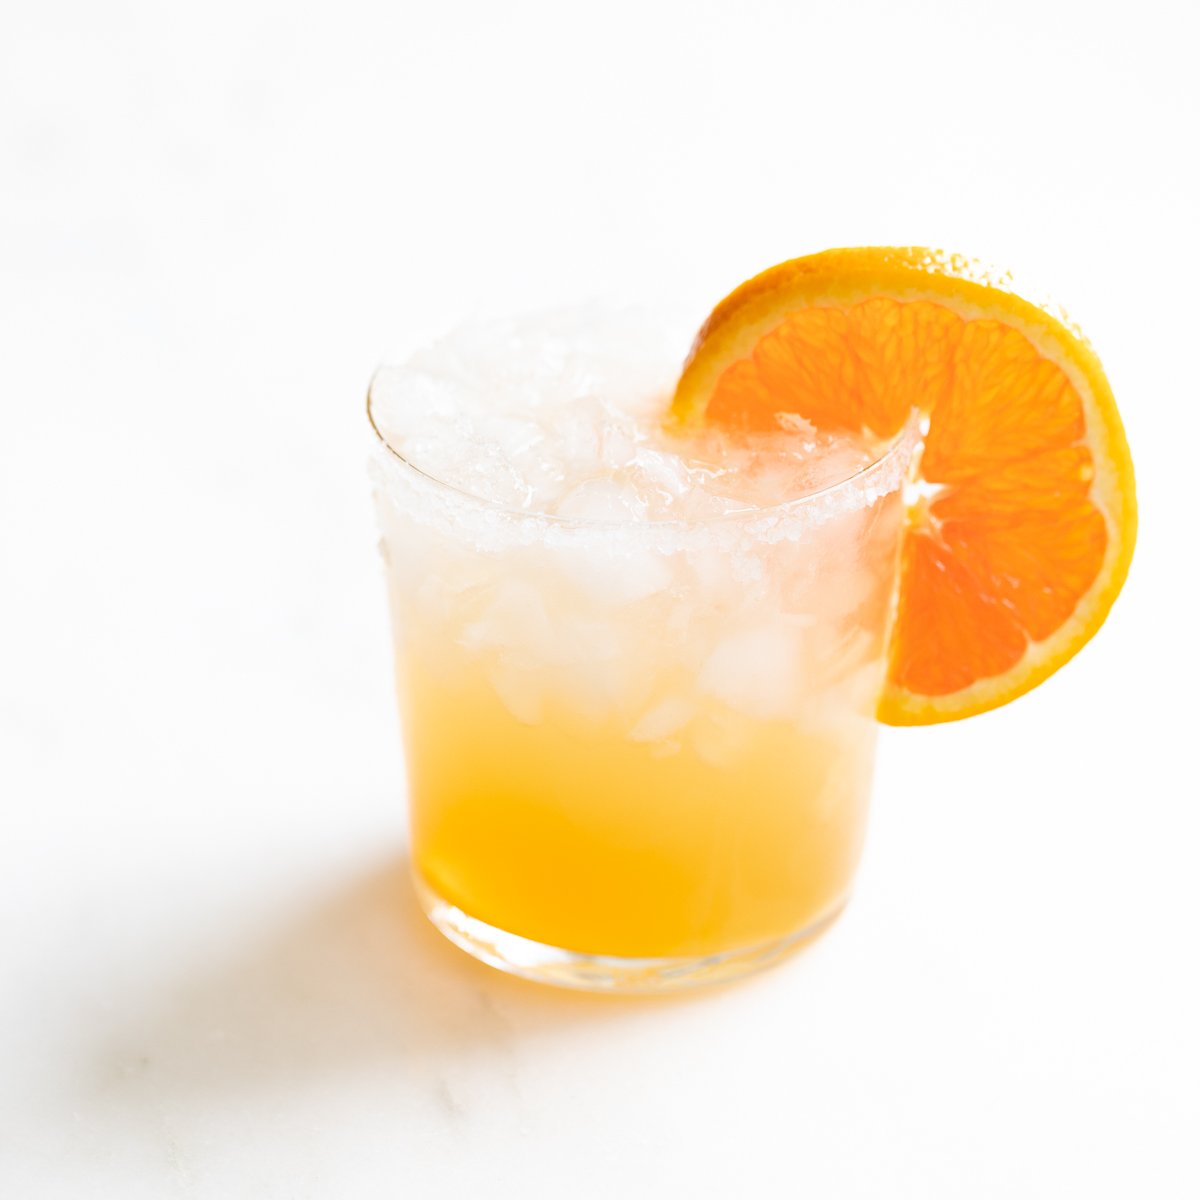 A glass of Cadillac margarita with crushed ice, garnished with an orange slice.